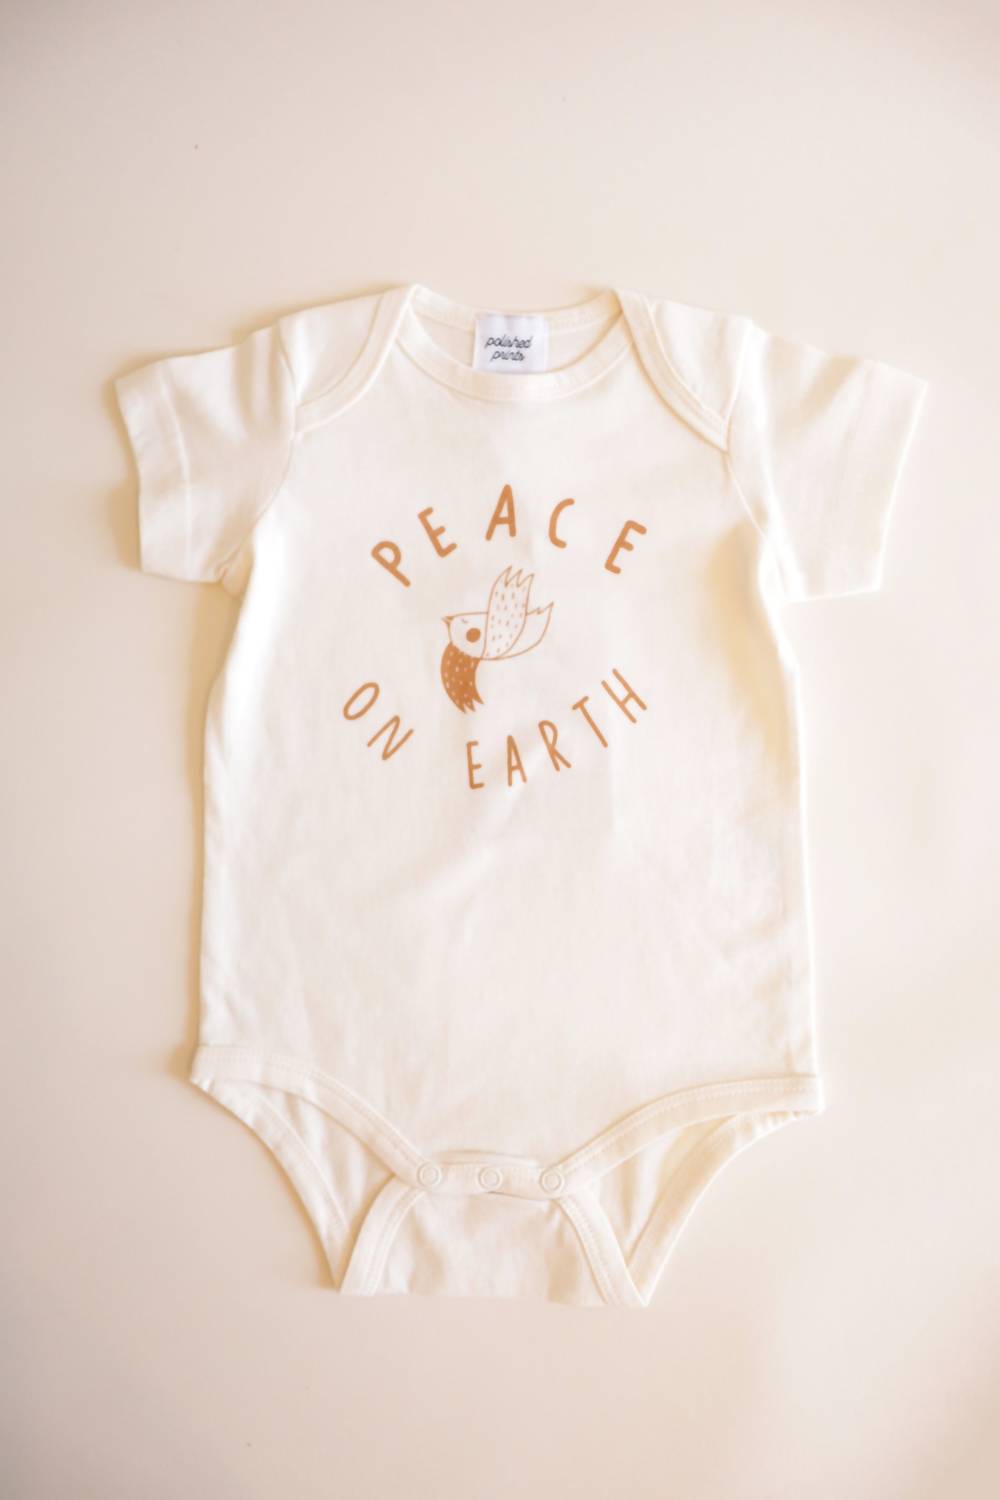 Primary image for Polished Prints - Peace on Earth Organic Cotton Baby Bodysuit